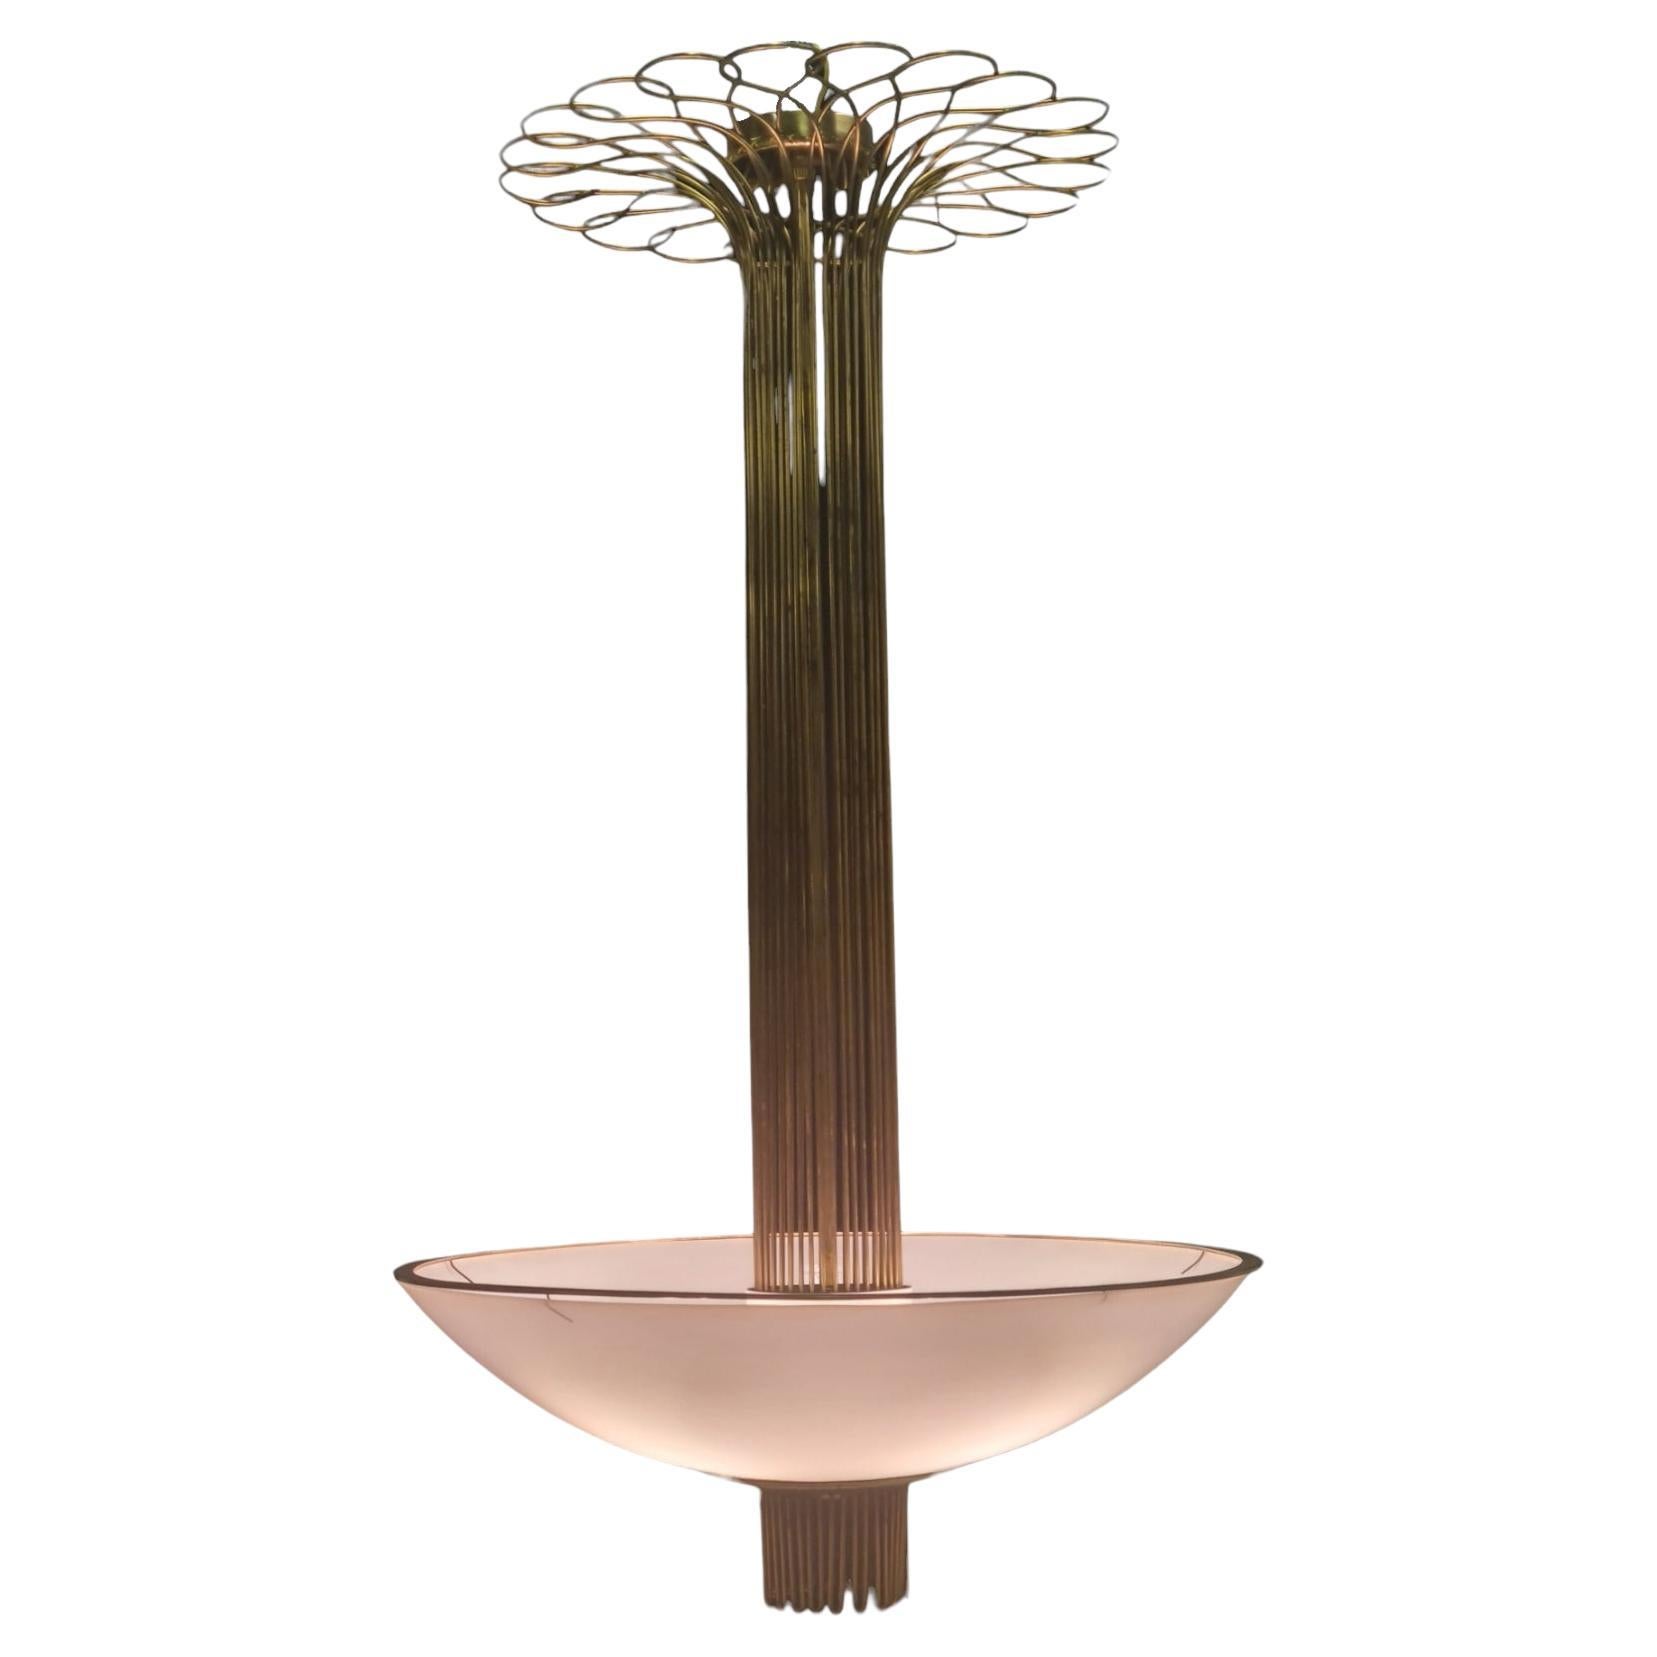 Scandinavian Modern Paavo Tynell Ceiling Lamp In Brass And Glass For Sale